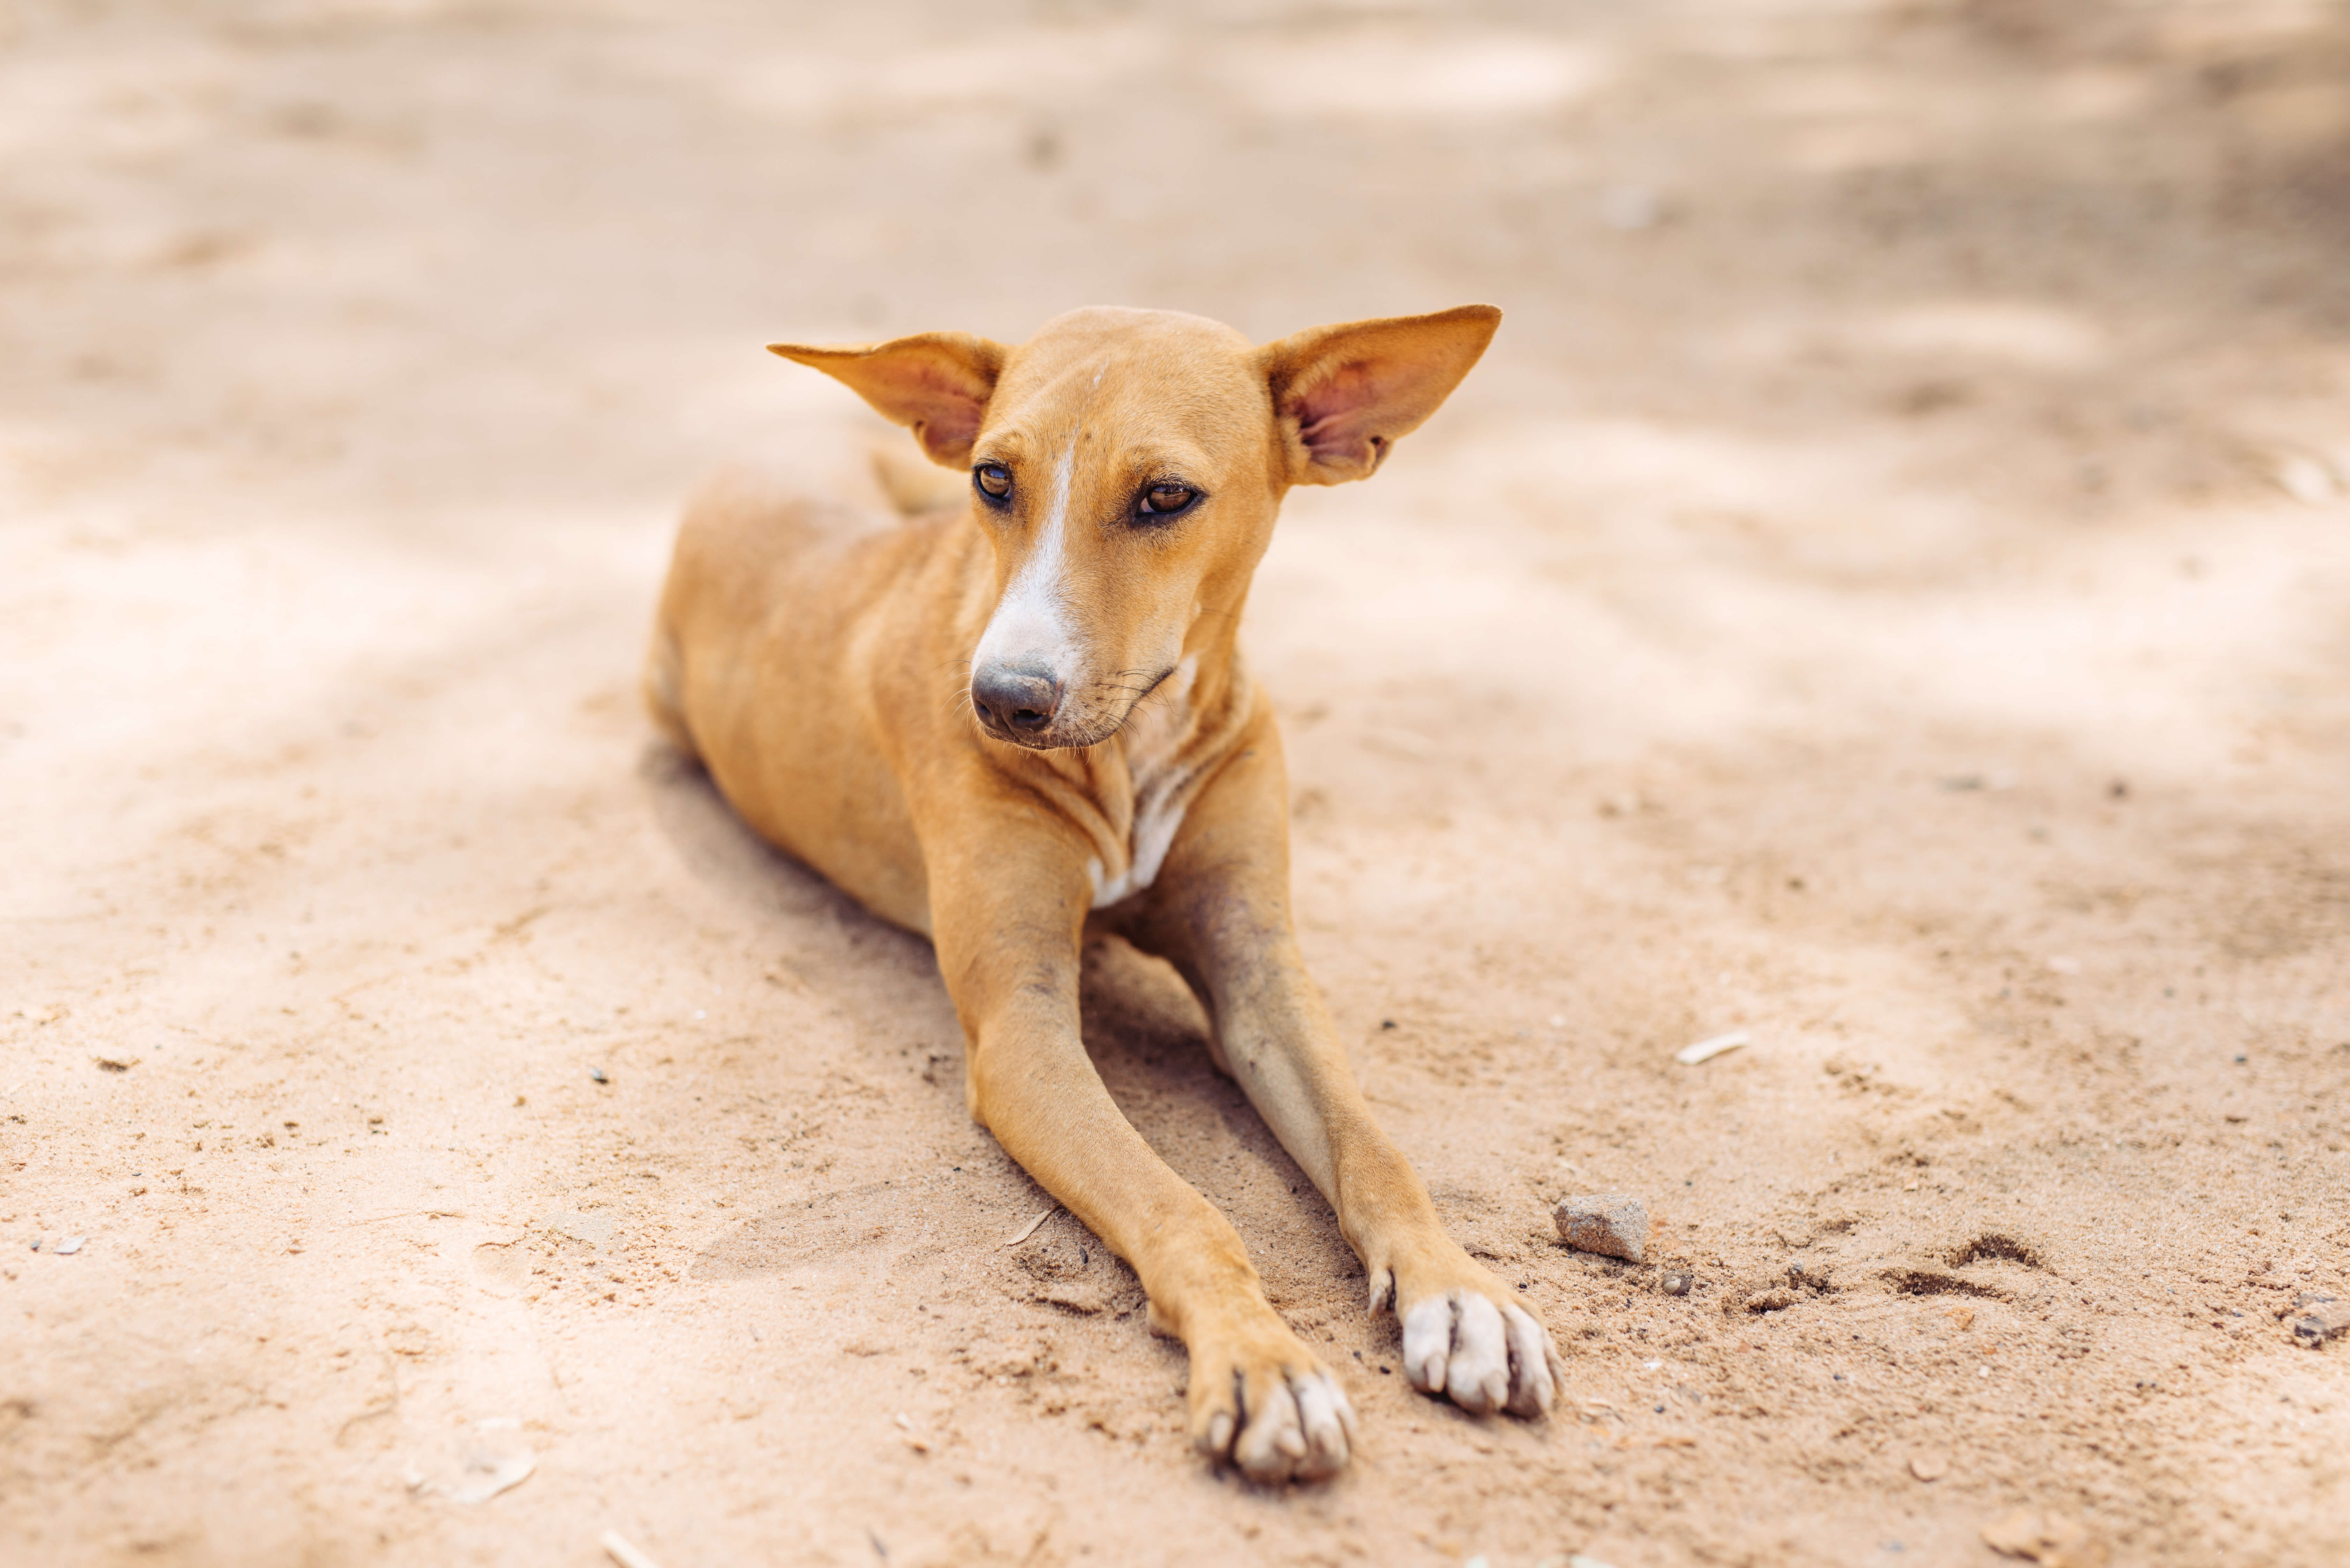 A dog in India.